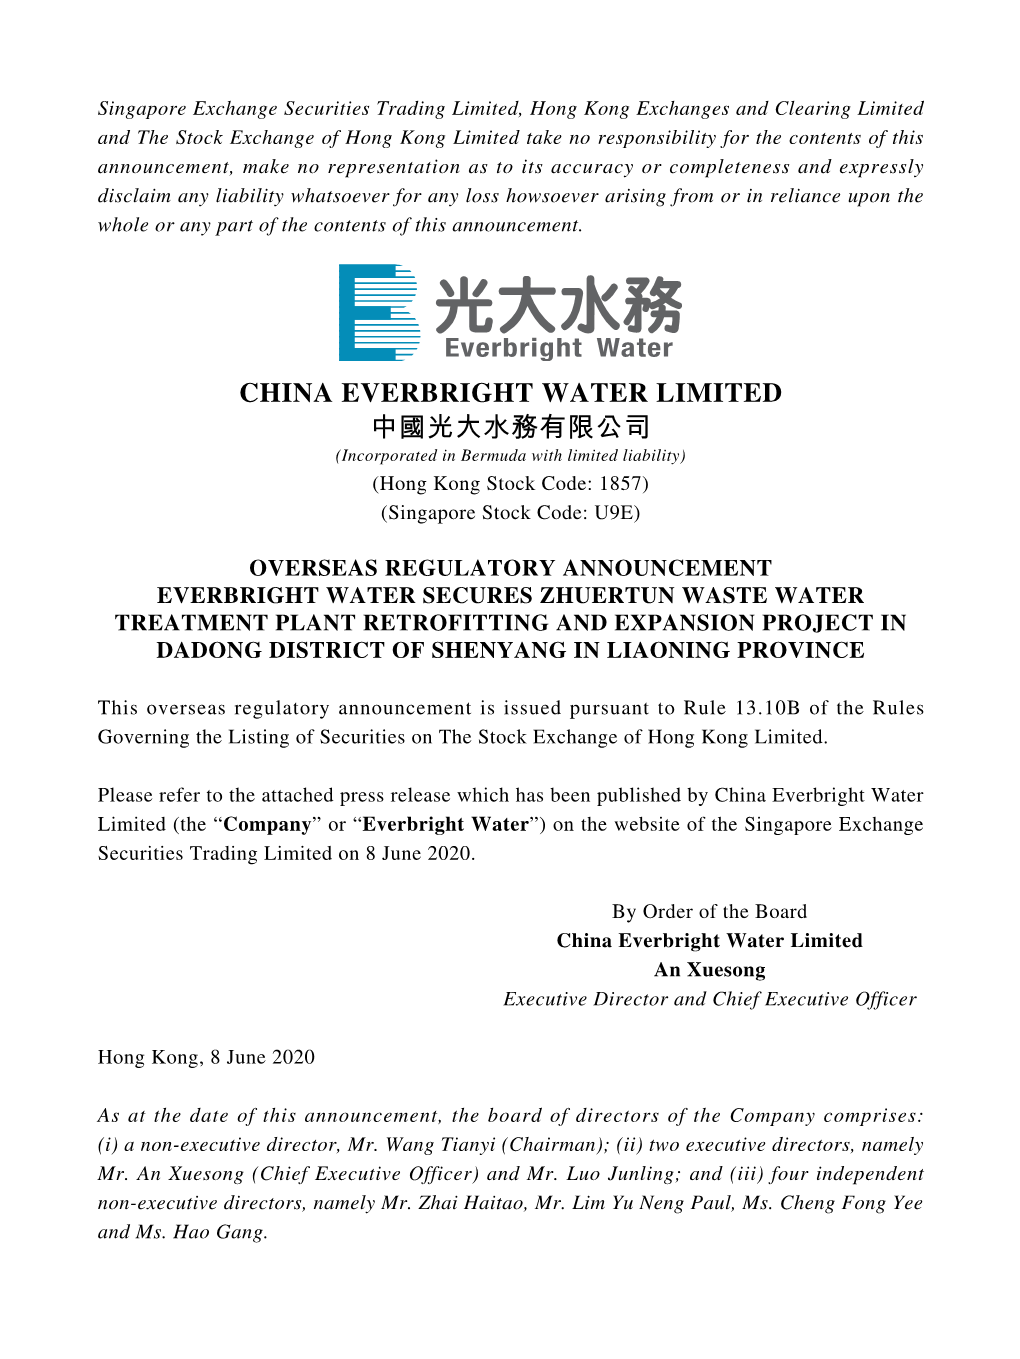 CHINA EVERBRIGHT WATER LIMITED 中國光大水務有限公司 (Incorporated in Bermuda with Limited Liability) (Hong Kong Stock Code: 1857) (Singapore Stock Code: U9E)